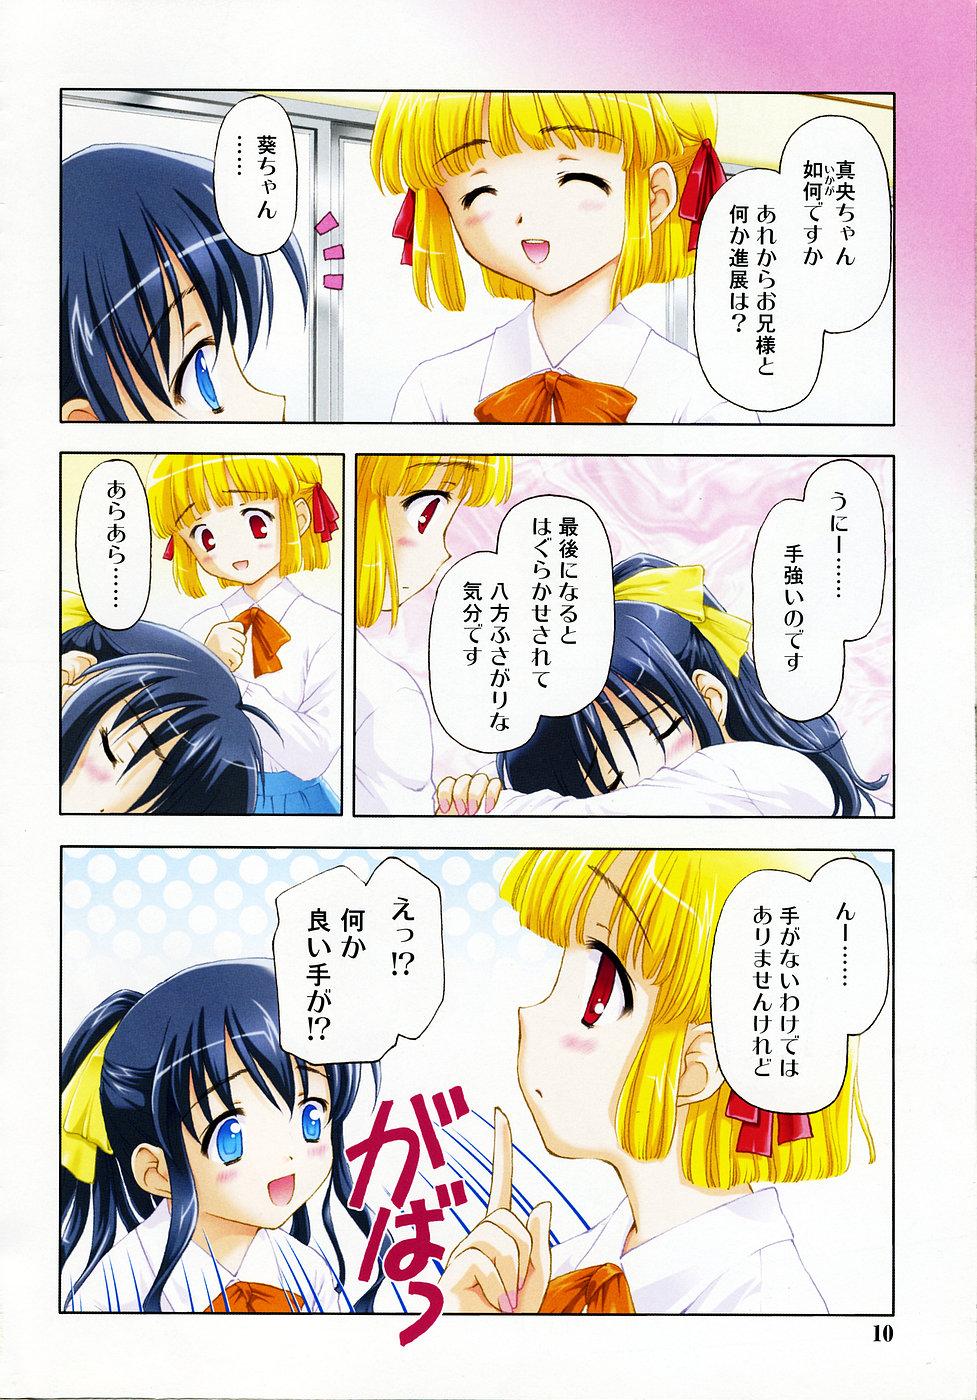 Moms Comic Rin Vol.04 2005-04 Spying - Page 10